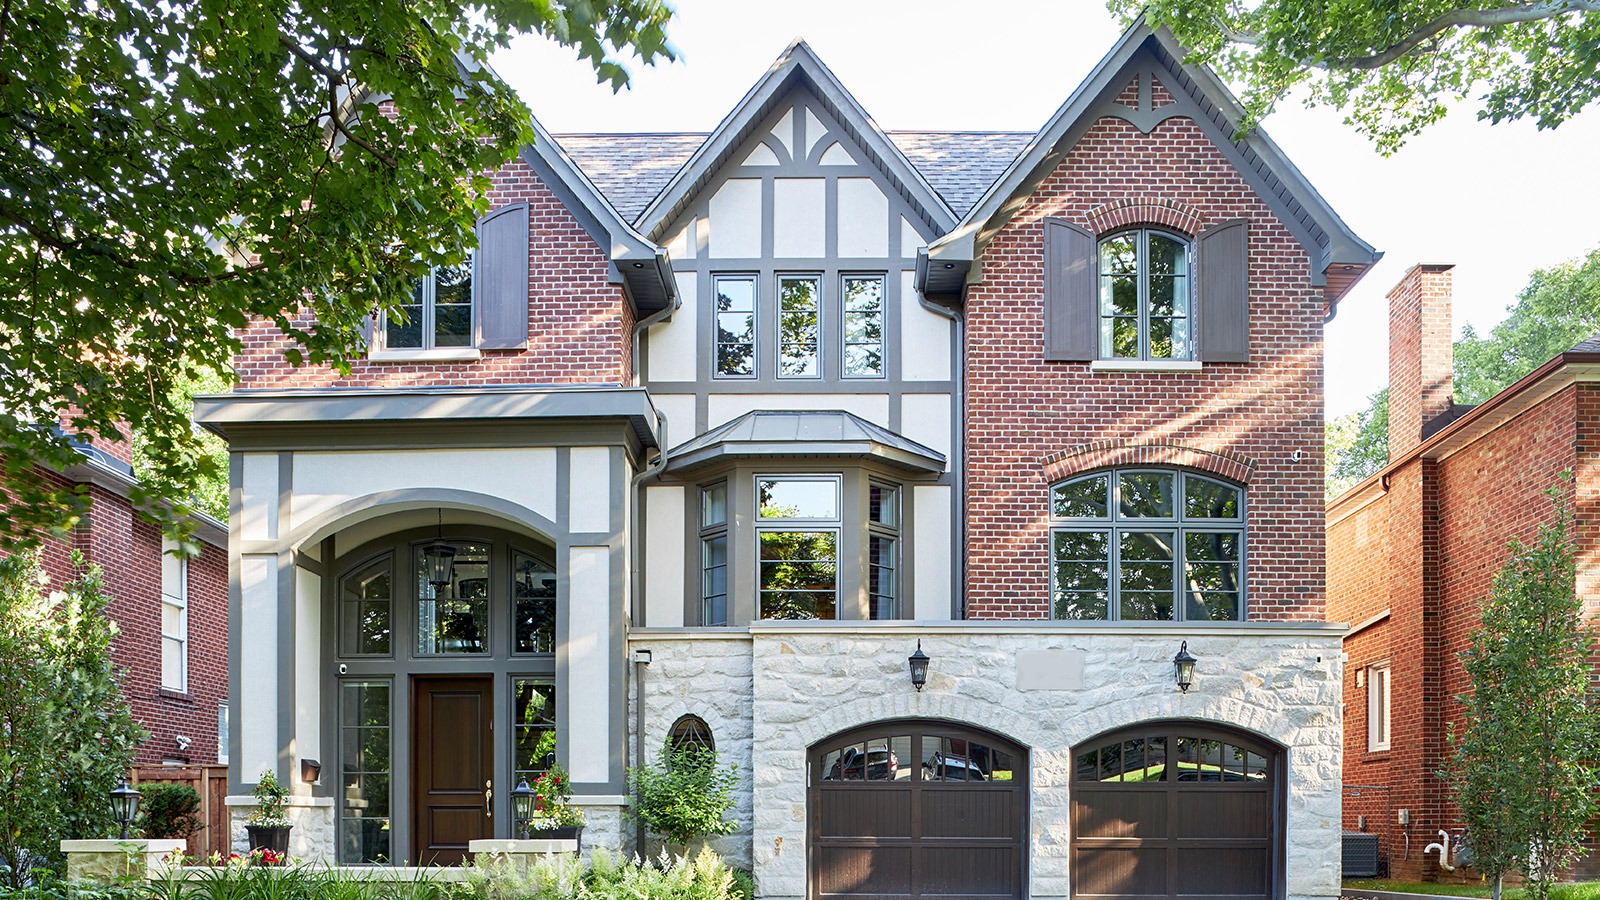 Toronto house with red brick, gray trim and white stucco.